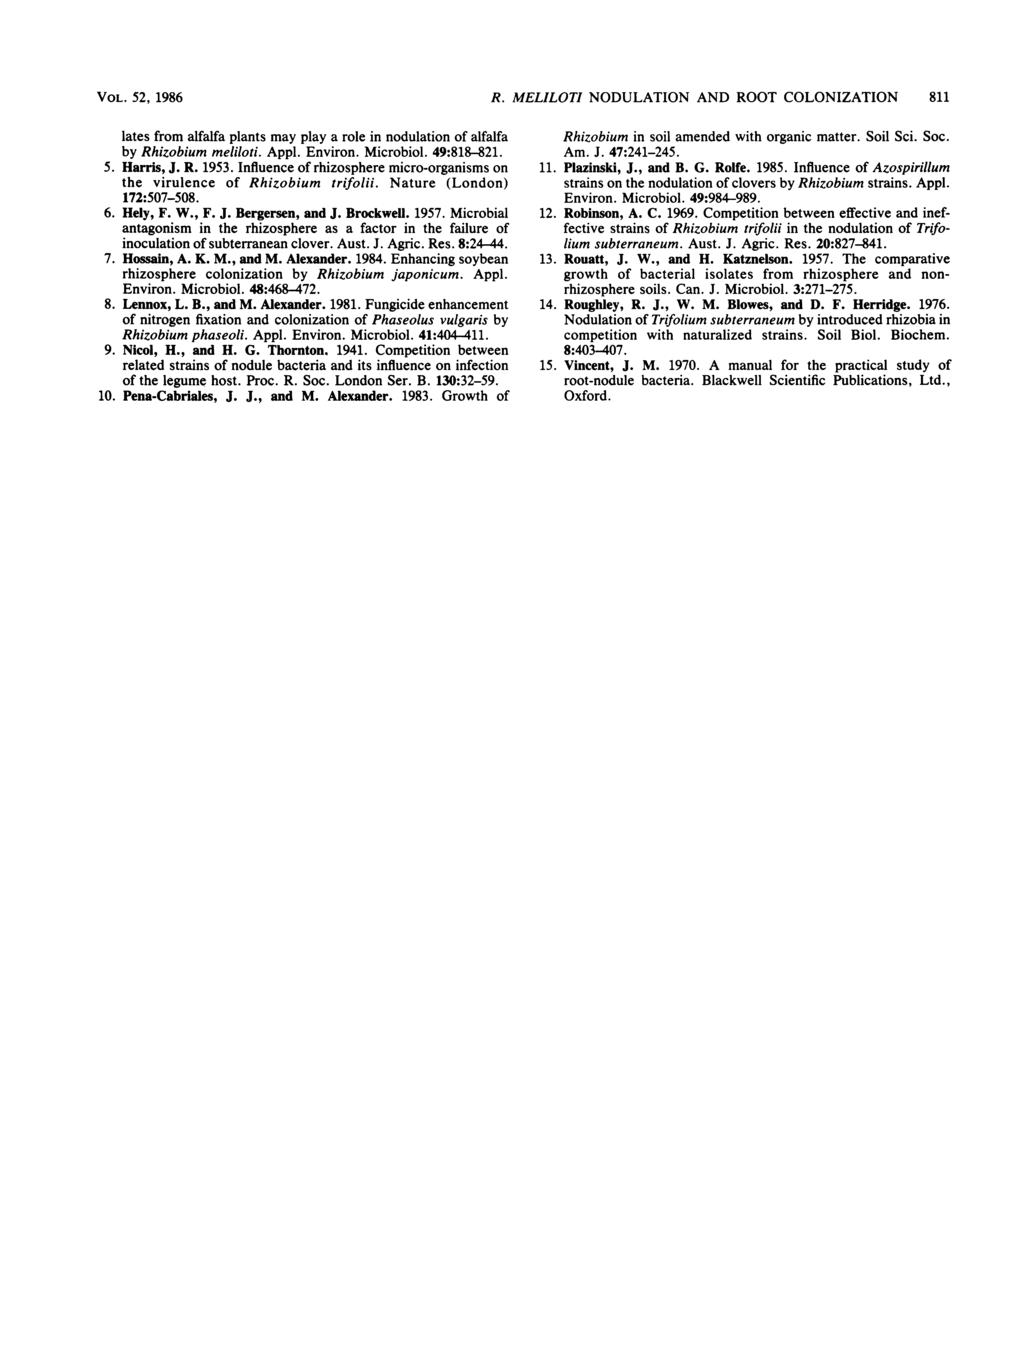 VOL. 52, 1986 R. MELILOTI NODULATION AND ROOT COLONIZATION 811 lates from alfalfa plants may play a role in nodulation of alfalfa by Rhizobium meliloti. Appl. Environ. Microbiol. 49:818-821. 5. Harris, J.